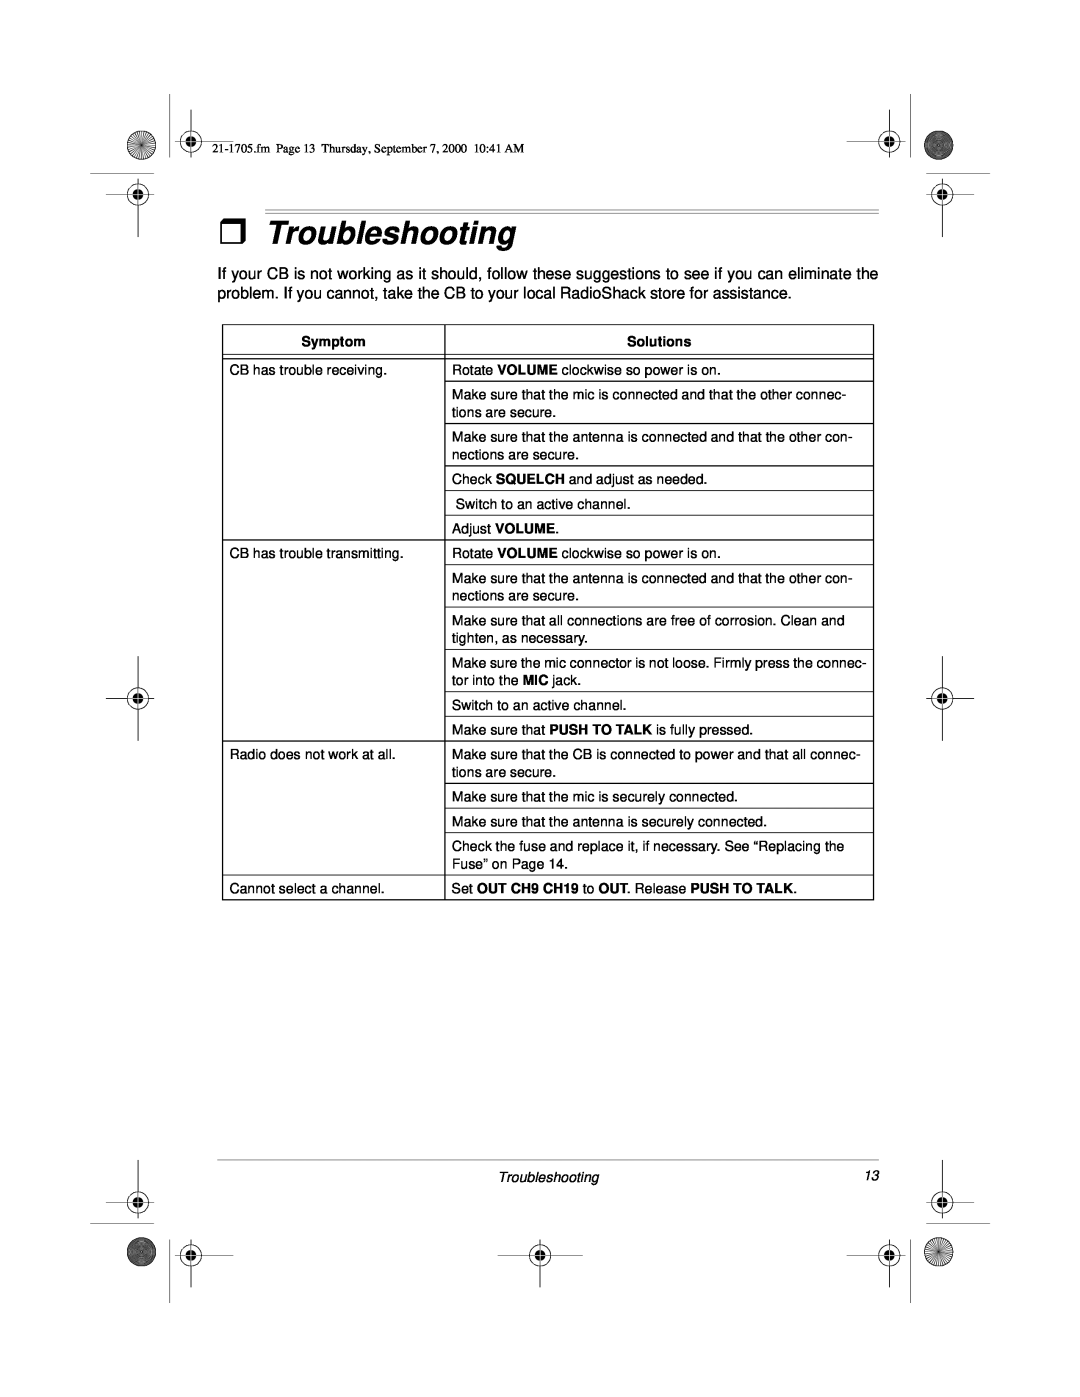 Radio Shack TRC-511 owner manual ˆTroubleshooting, Symptom, Solutions, Set OUT CH9 CH19 to OUT. Release PUSH TO TALK 